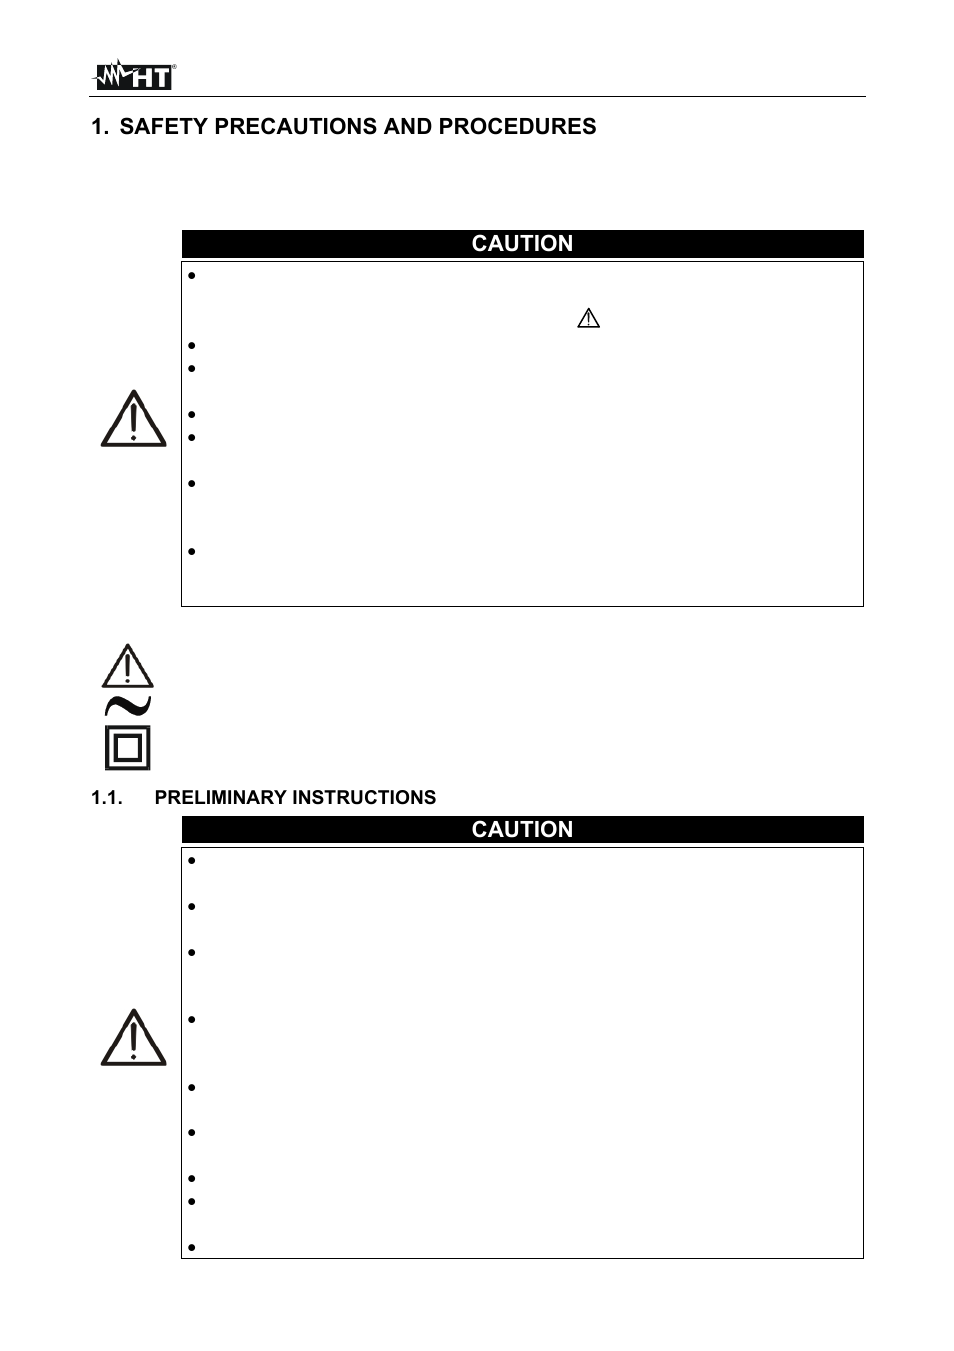 Safety precautions and procedures, Caution | HT instruments MACROTEST 5035 User Manual | Page 4 / 80